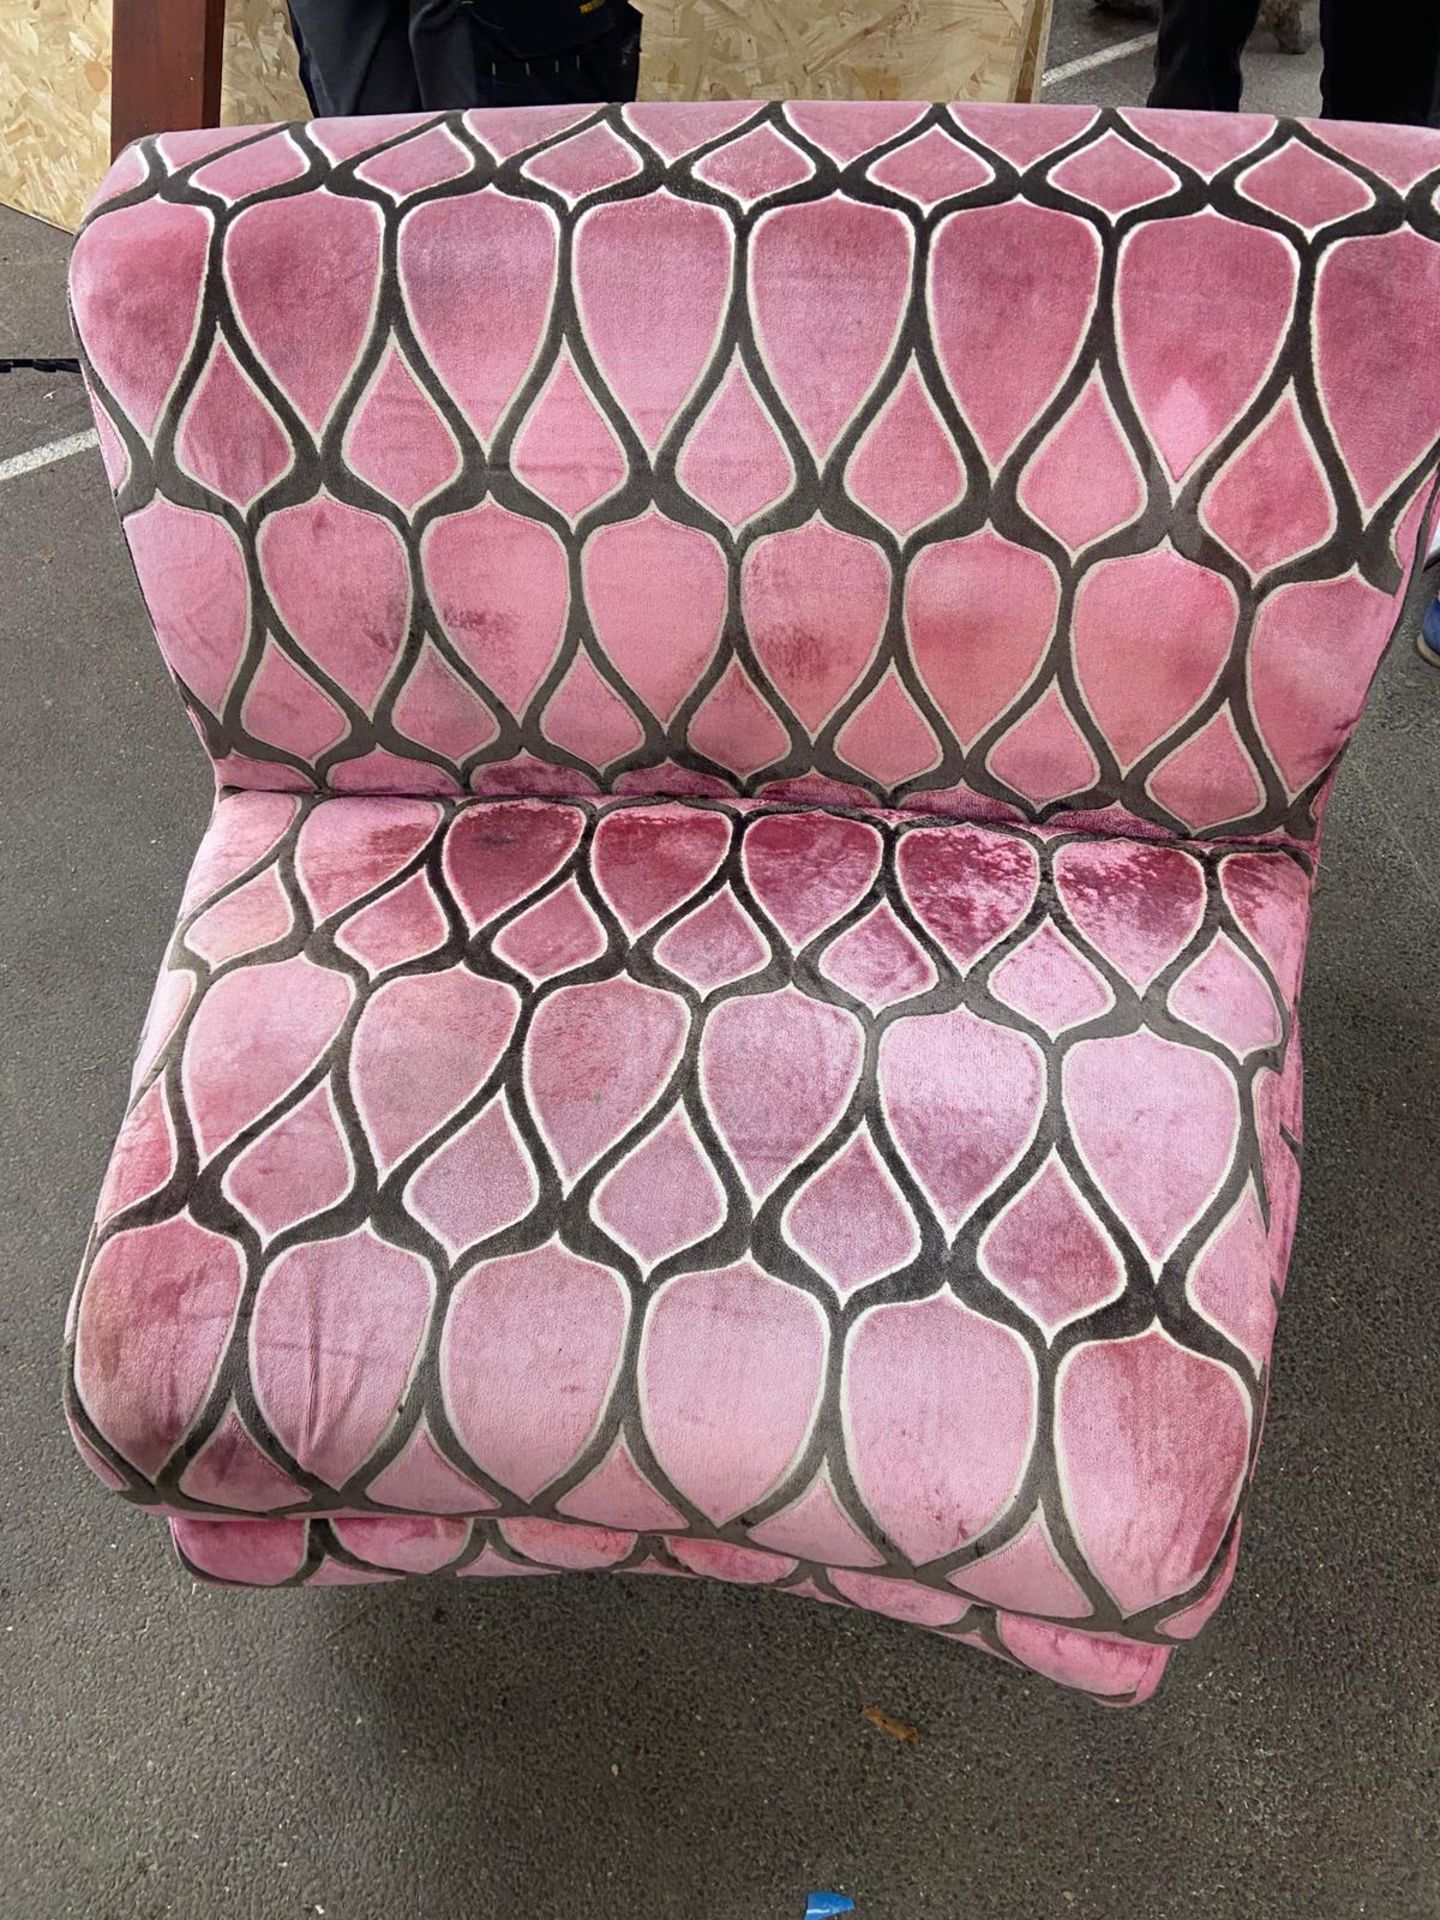 4x Lounge Seat Sofa Single Seater Upholstered In Velvet Pink And Black 830mm x 750mm x 480mm - Image 3 of 7